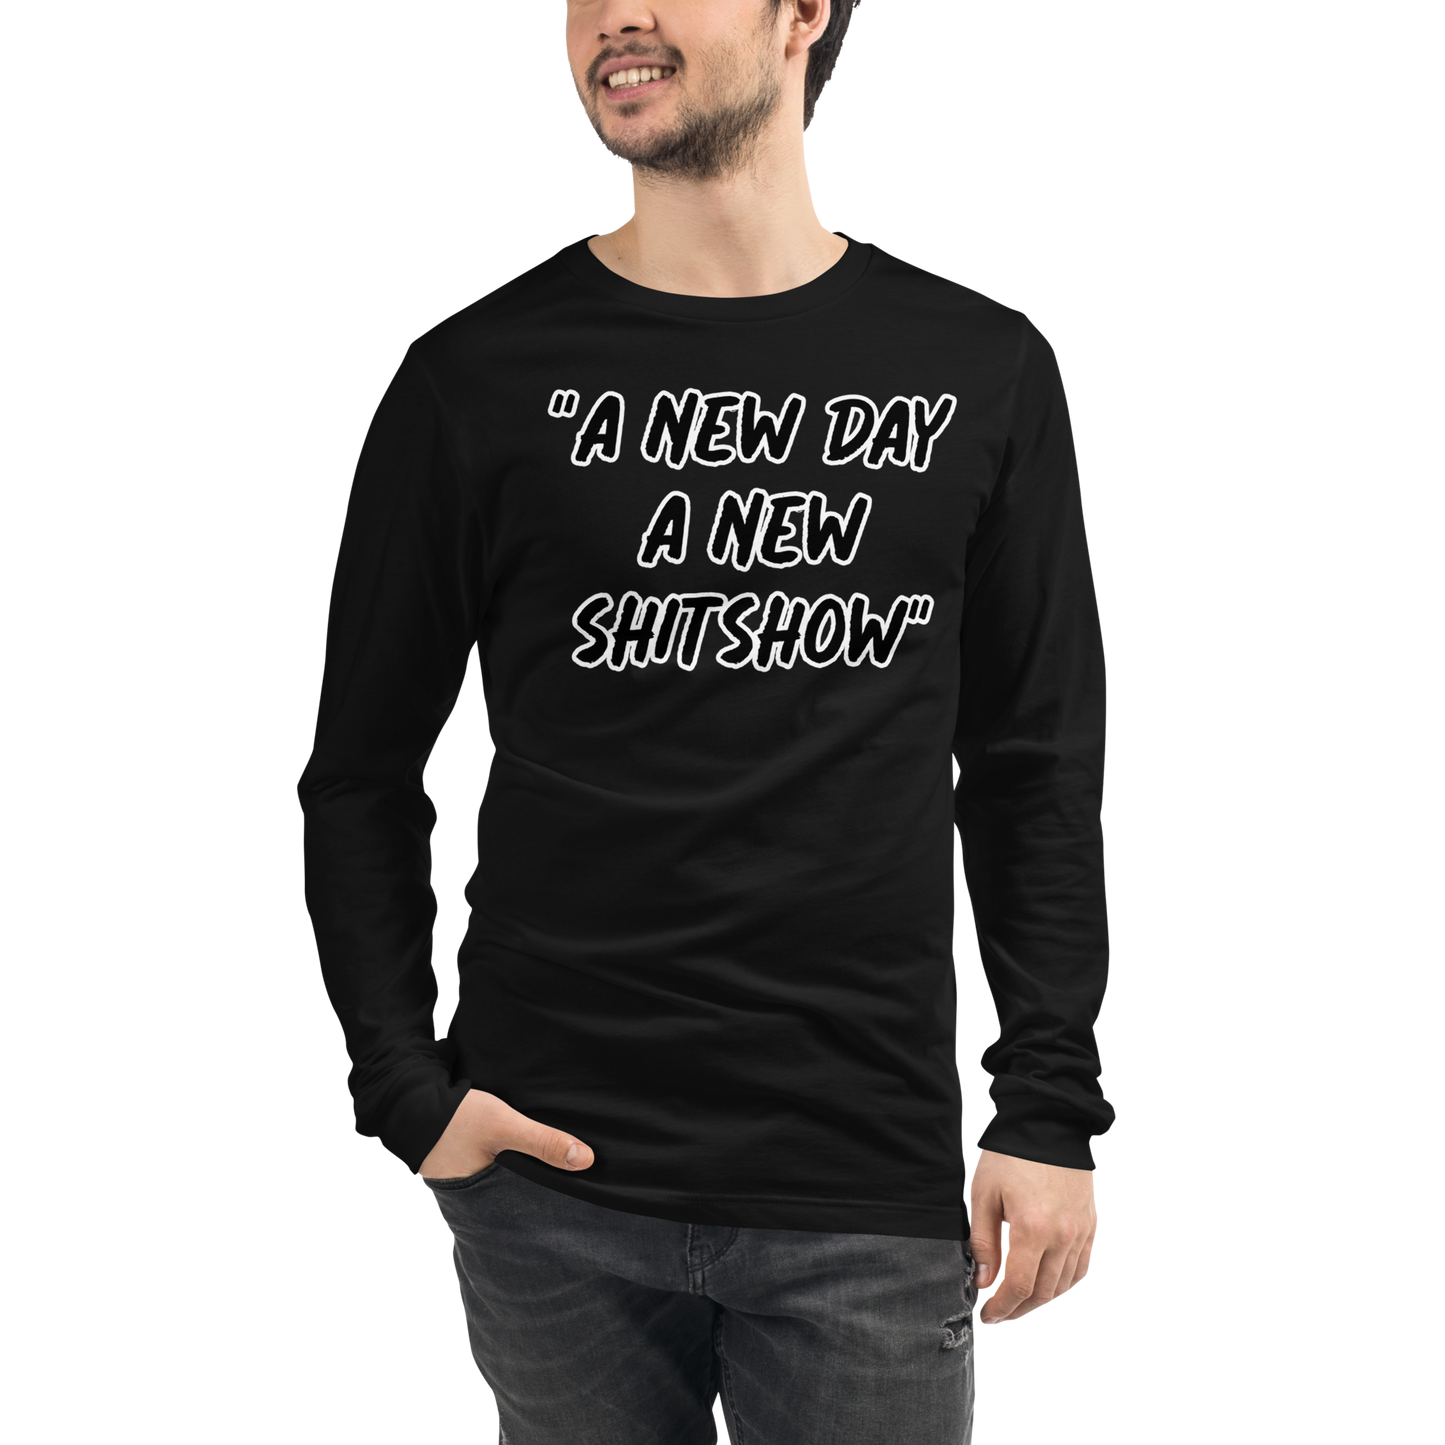 A New Day Show Long Sleeve Shirt